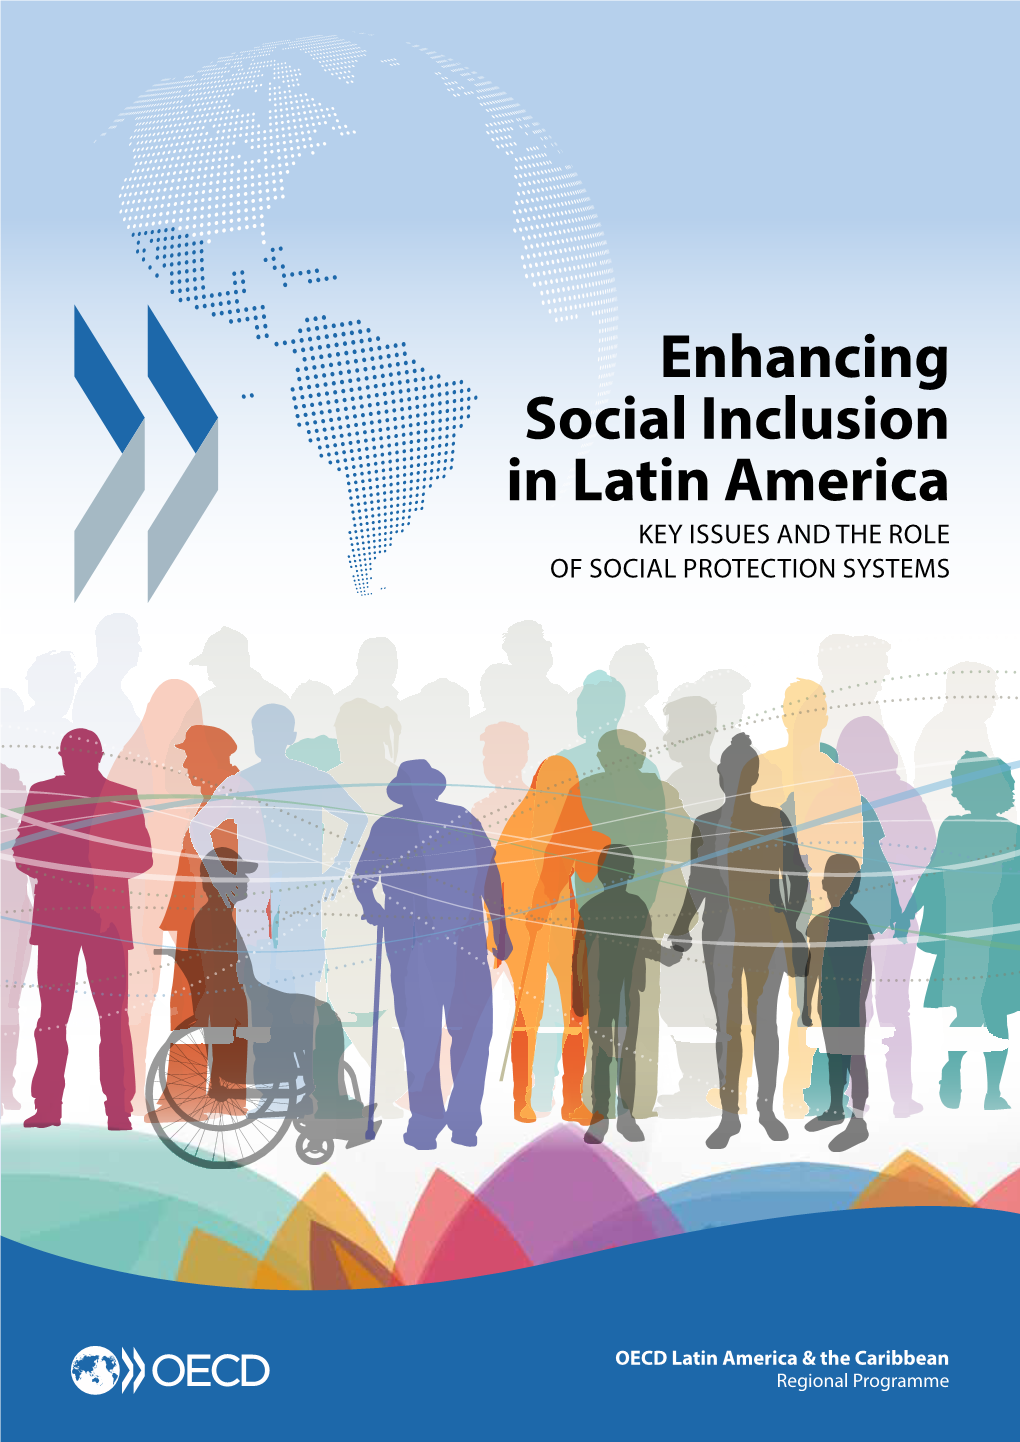 Enhancing Social Inclusion in Latin America KEY ISSUES and the ROLE of SOCIAL PROTECTION SYSTEMS